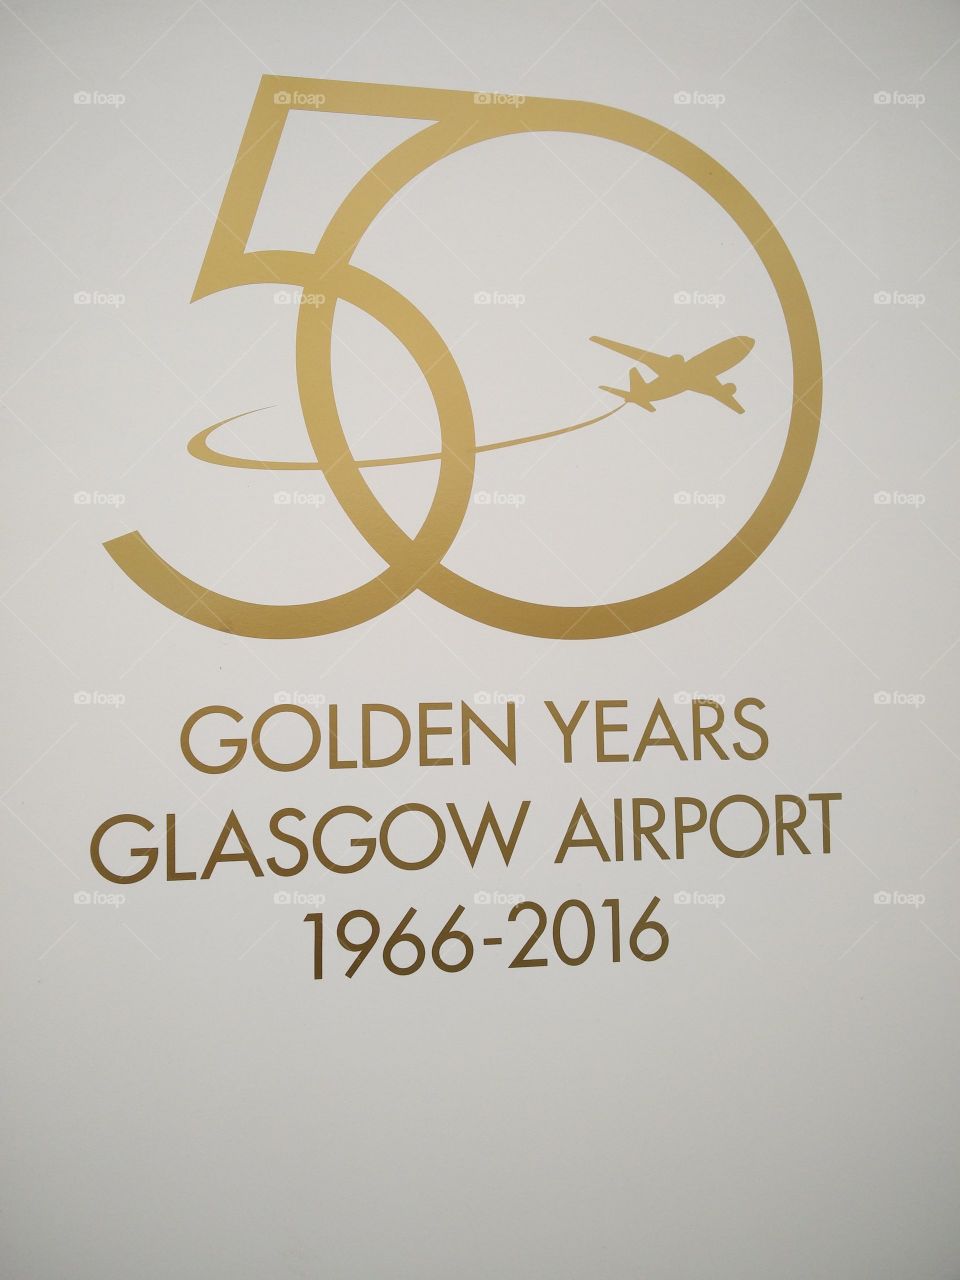 Glasgow Airport 50 years old